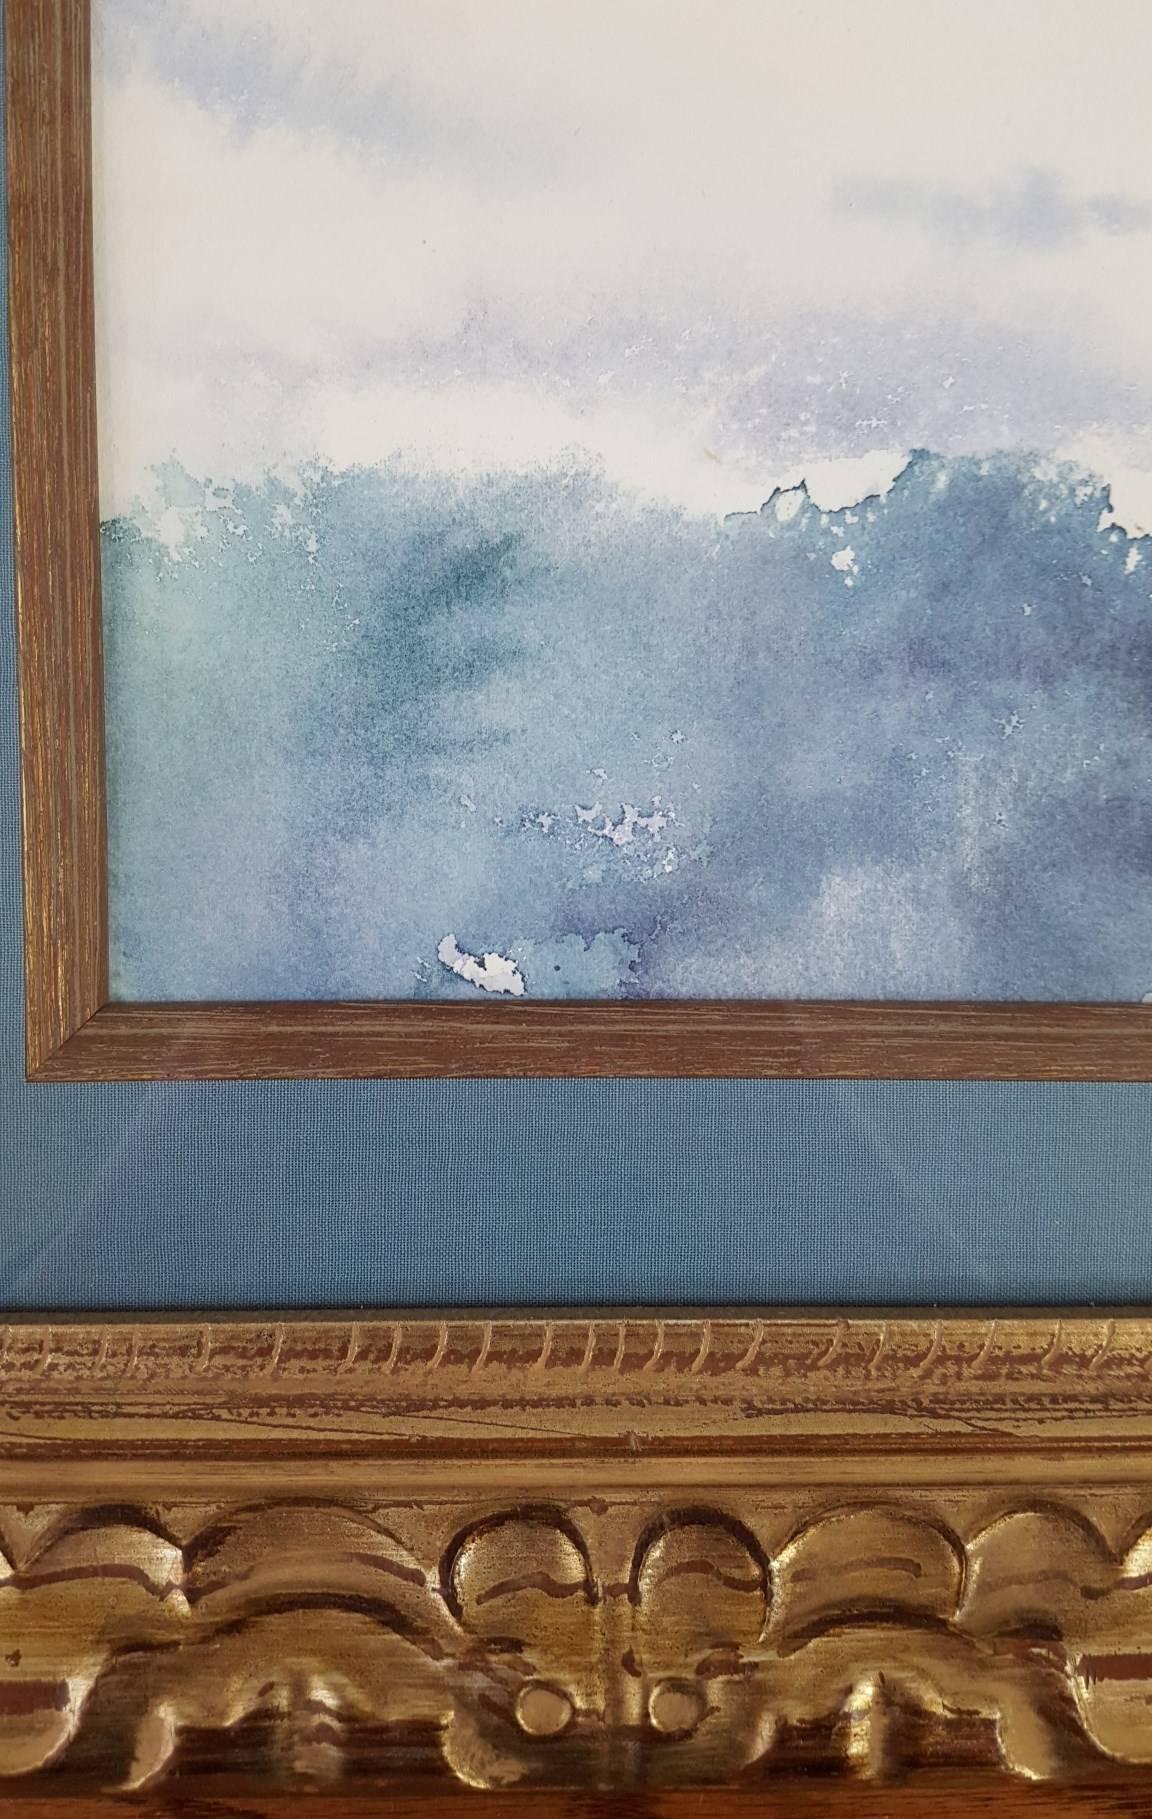 Flight of the Seagulls, Fully Framed. - Contemporary Painting by Gillie Cawthorne